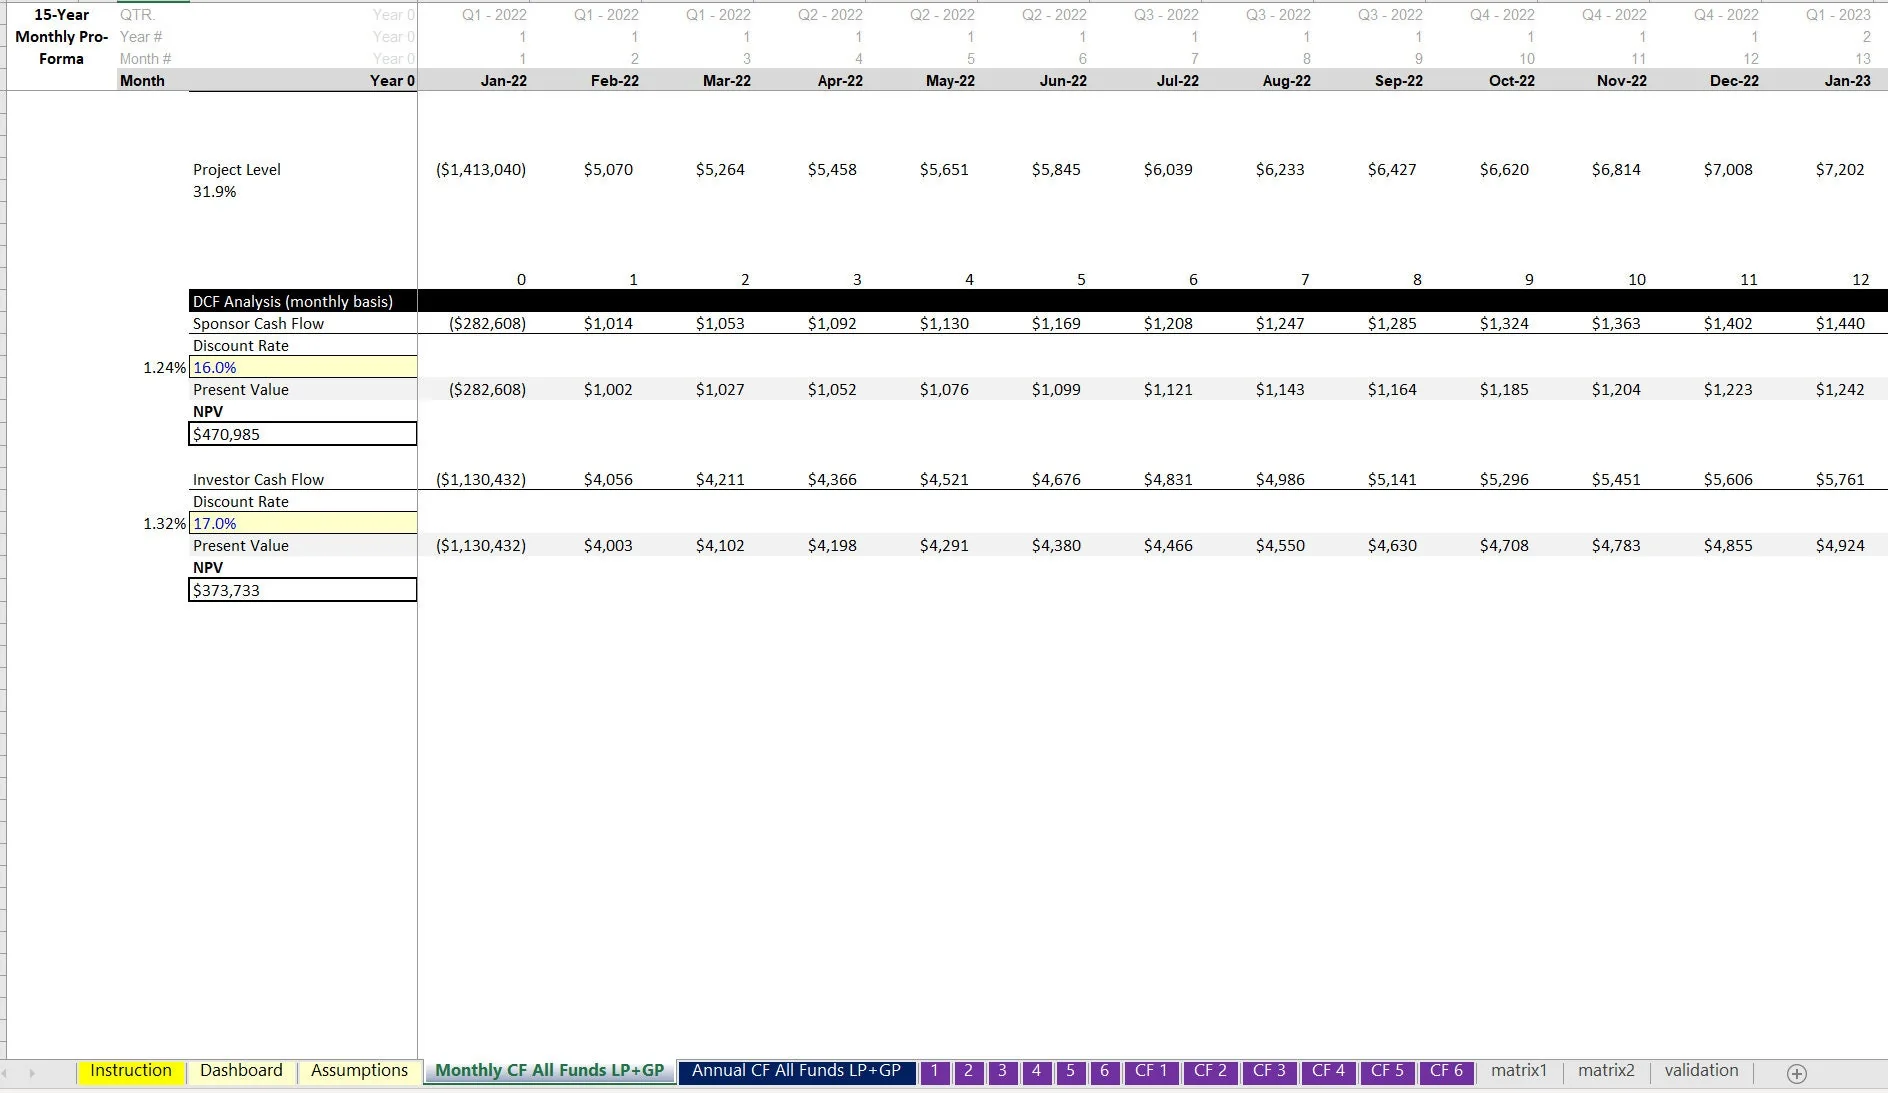 Self Storage Equity Ramping Financial Model (Excel workbook (XLSX)) Preview Image